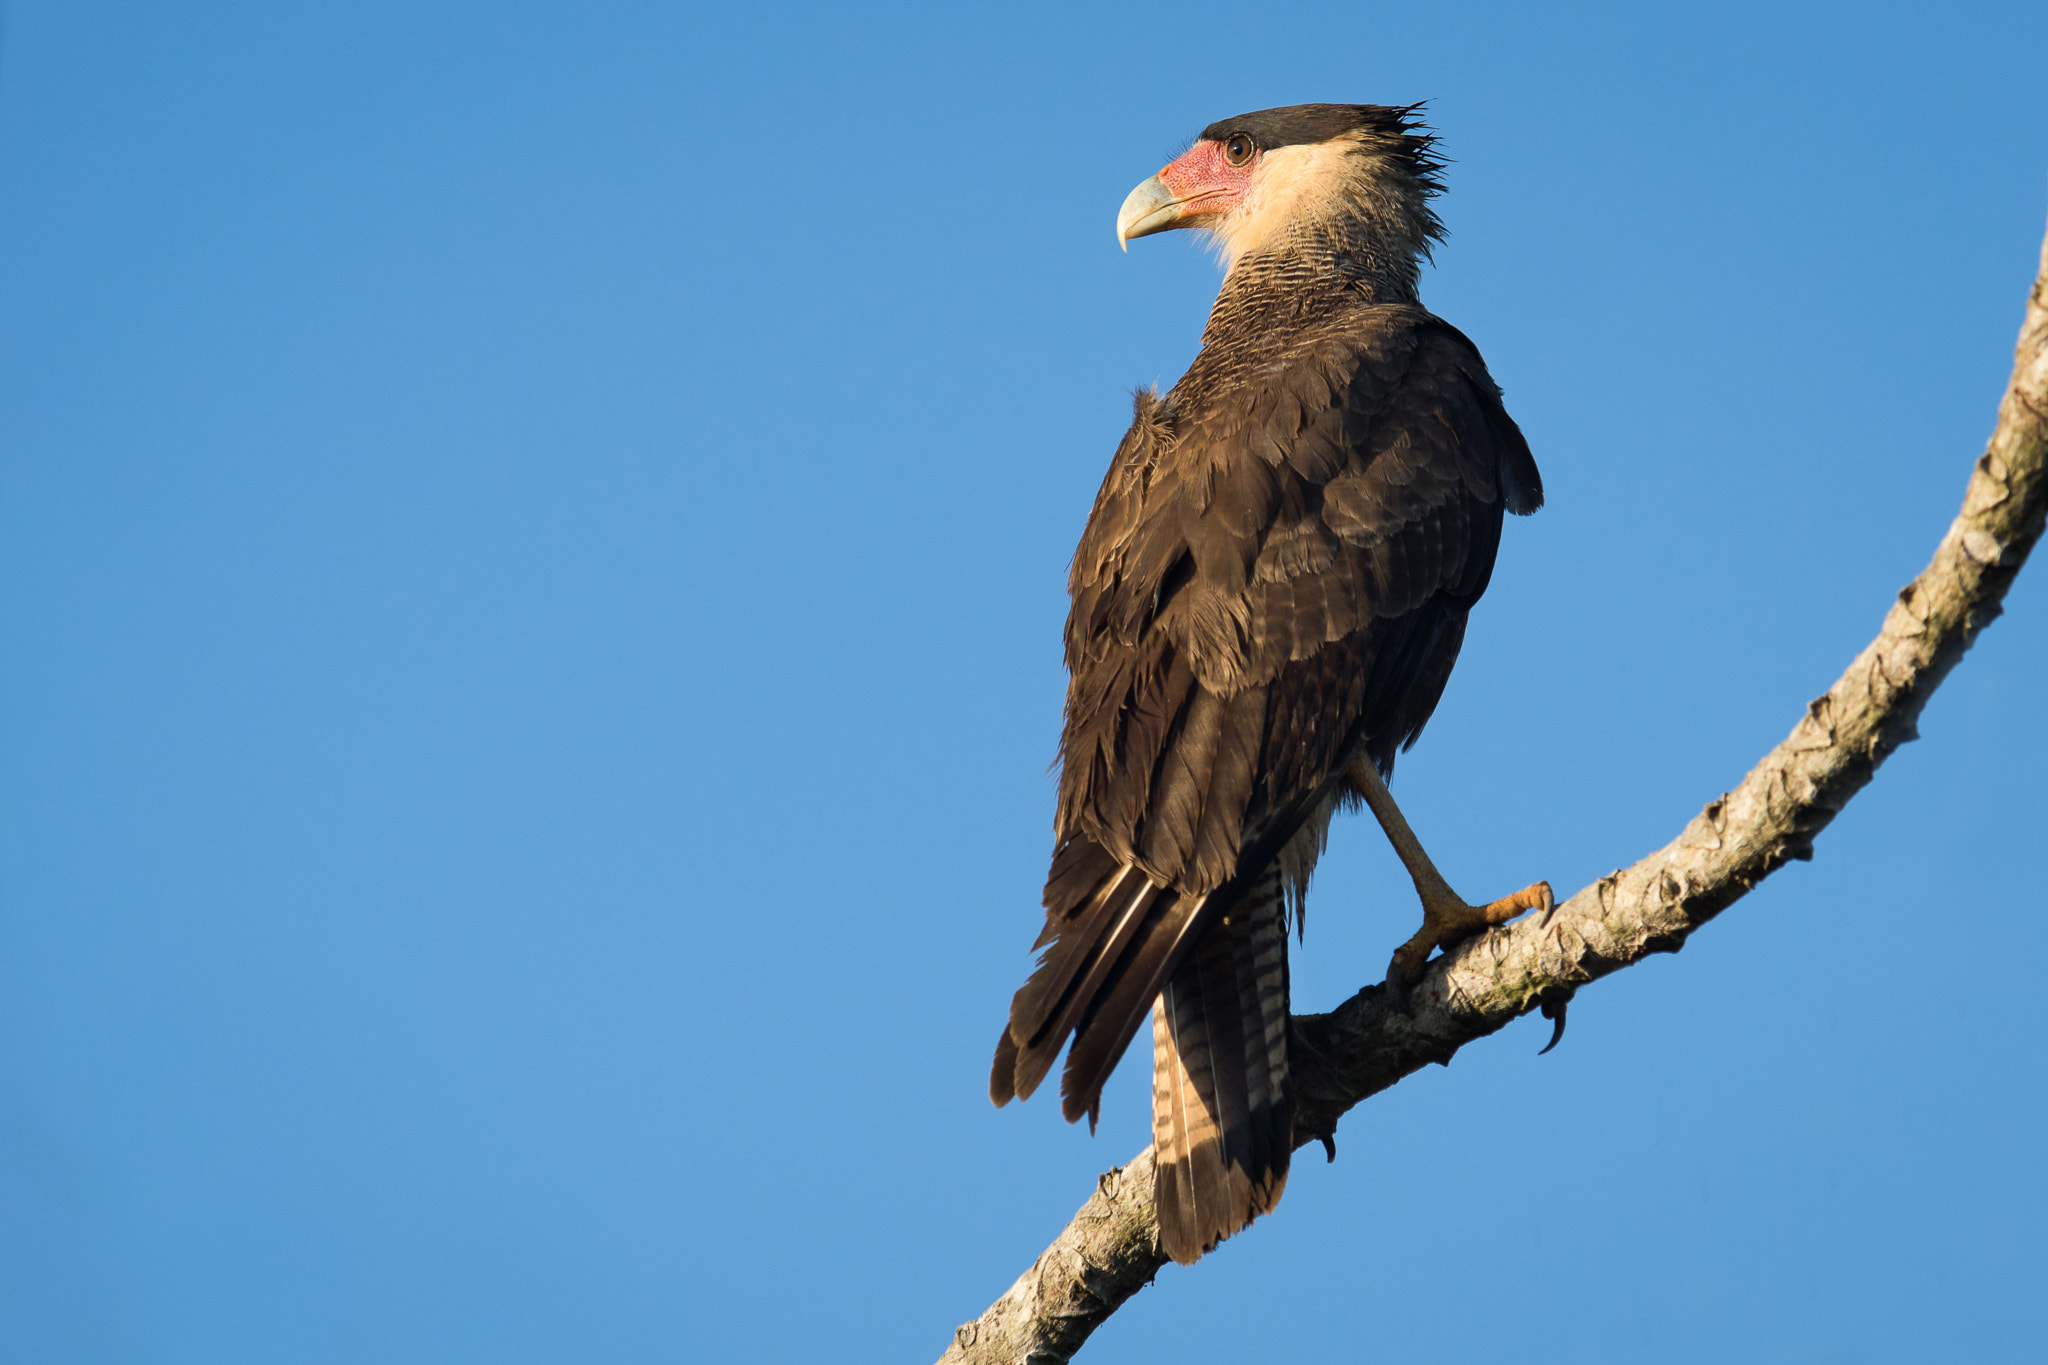 300mm F2.8 G sample photo. Southern crested caracara photography